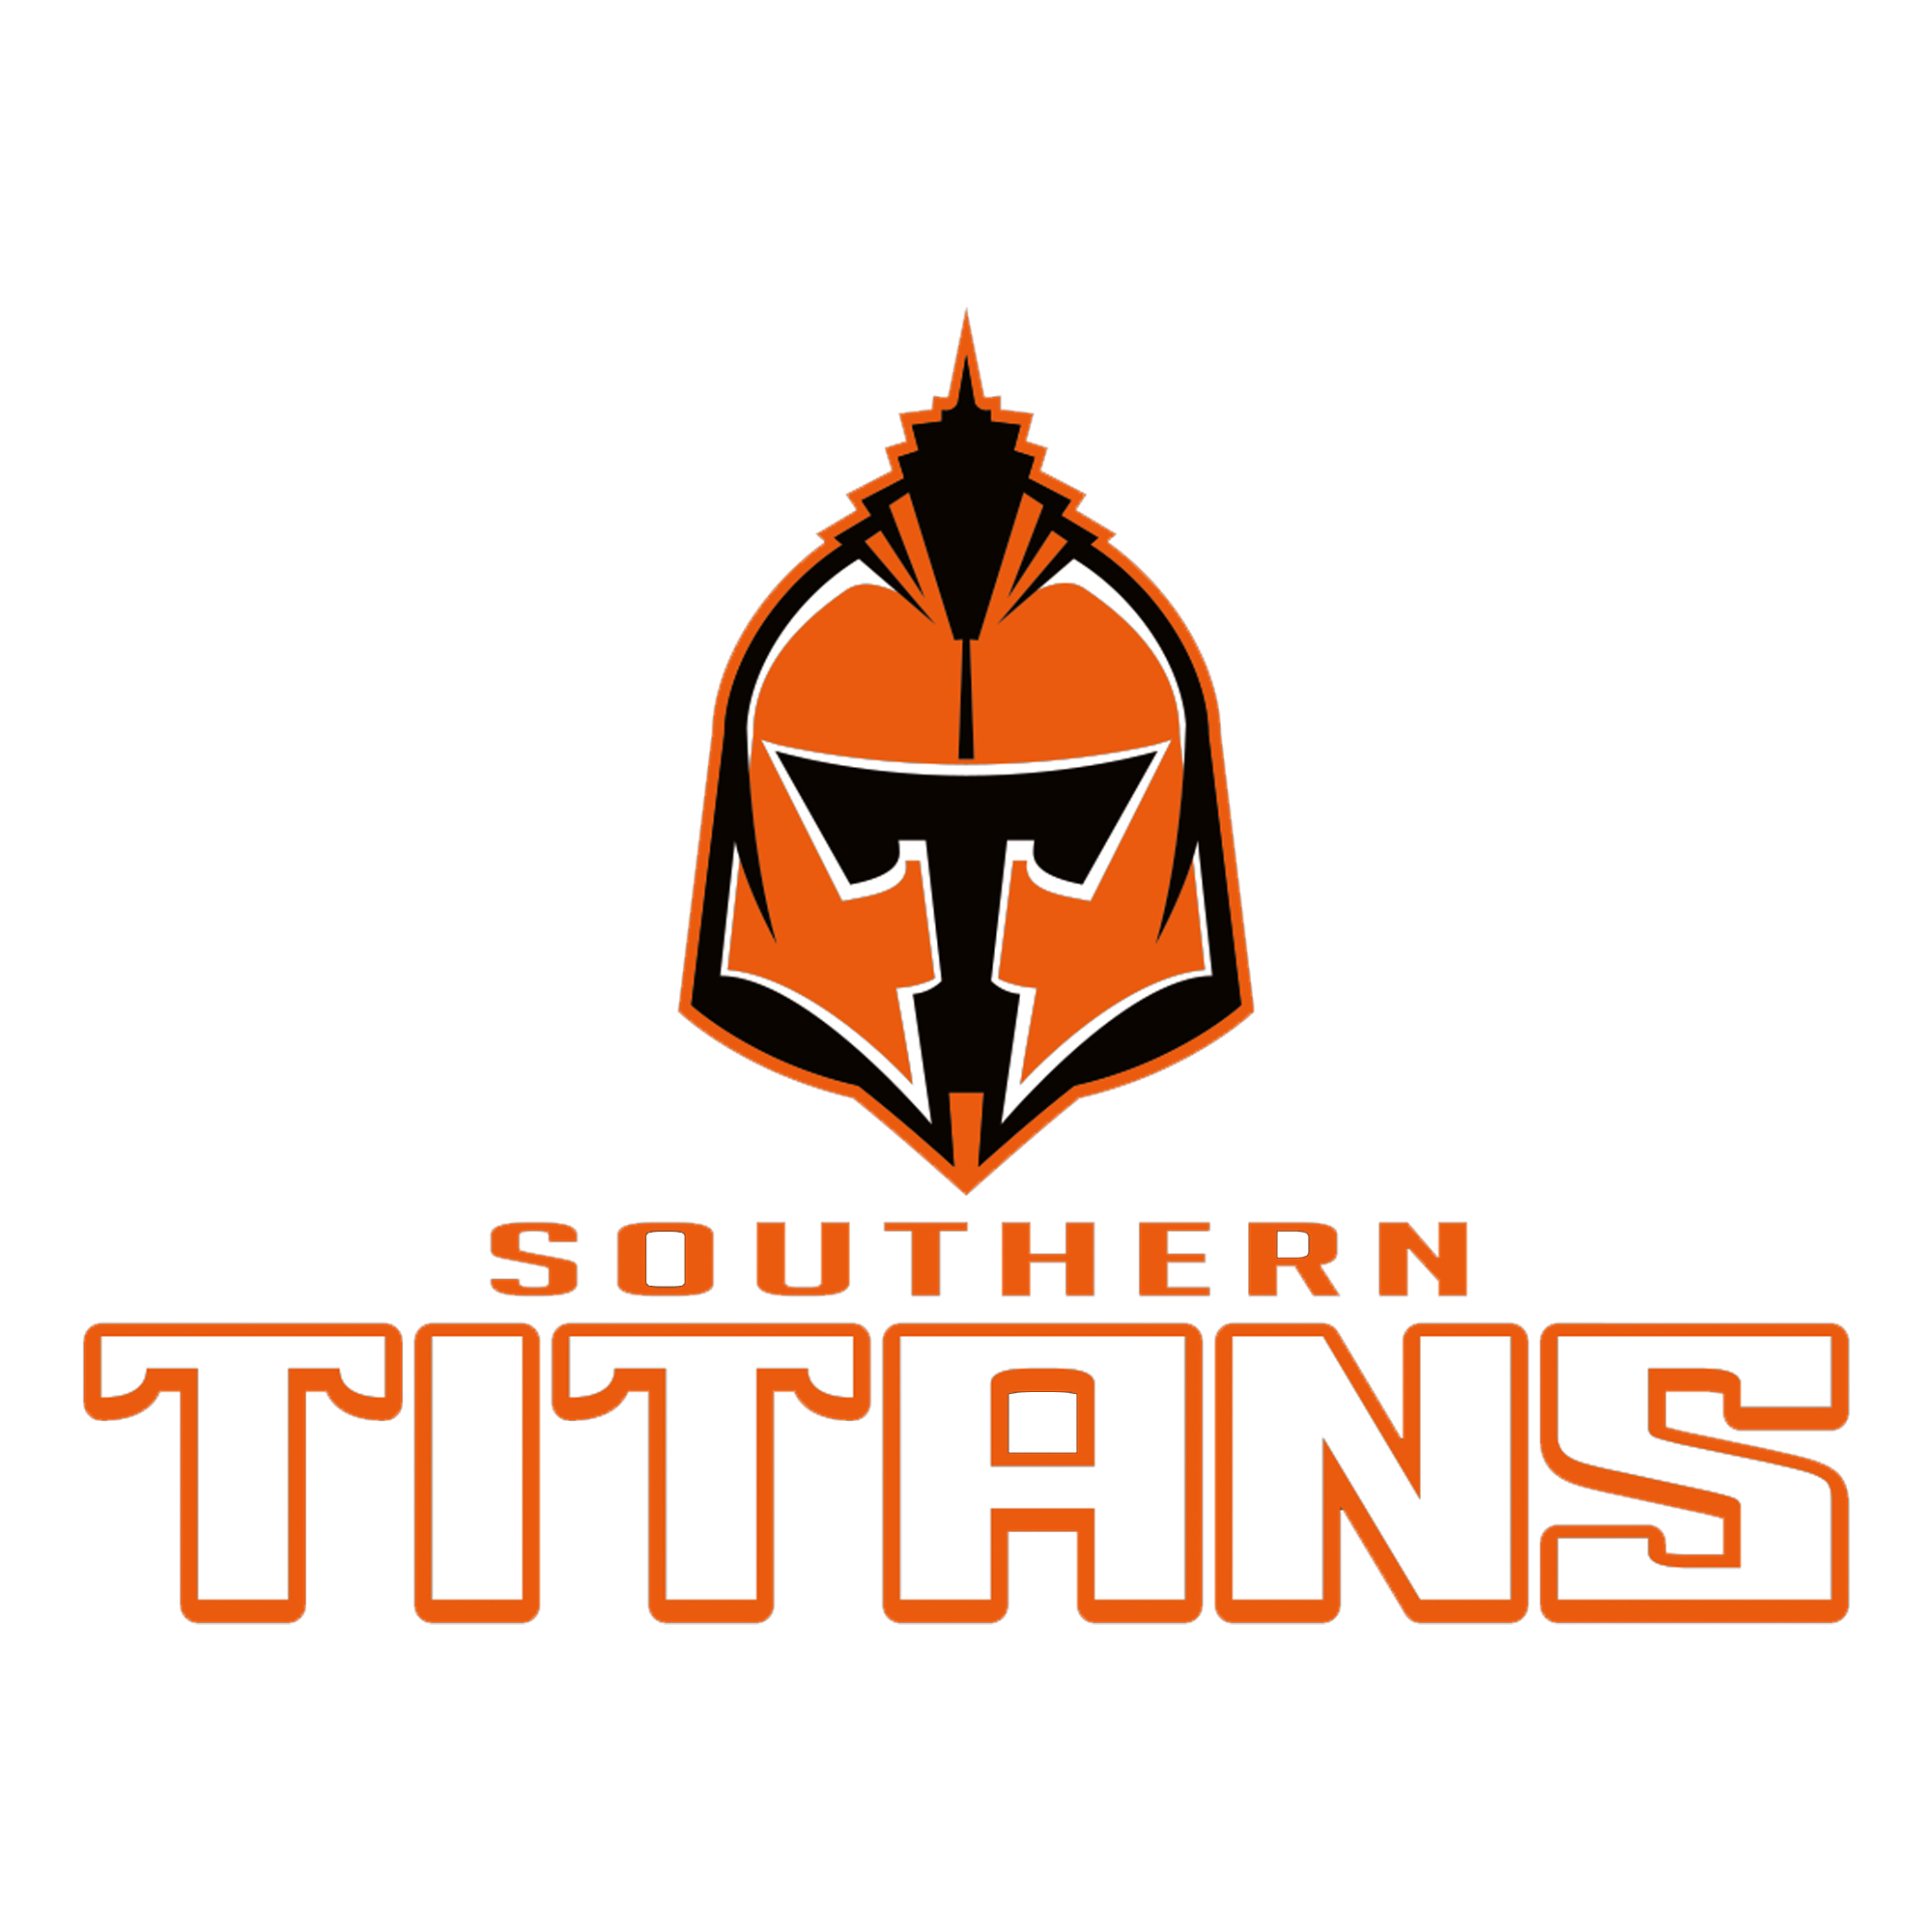 Southern Titans - Players